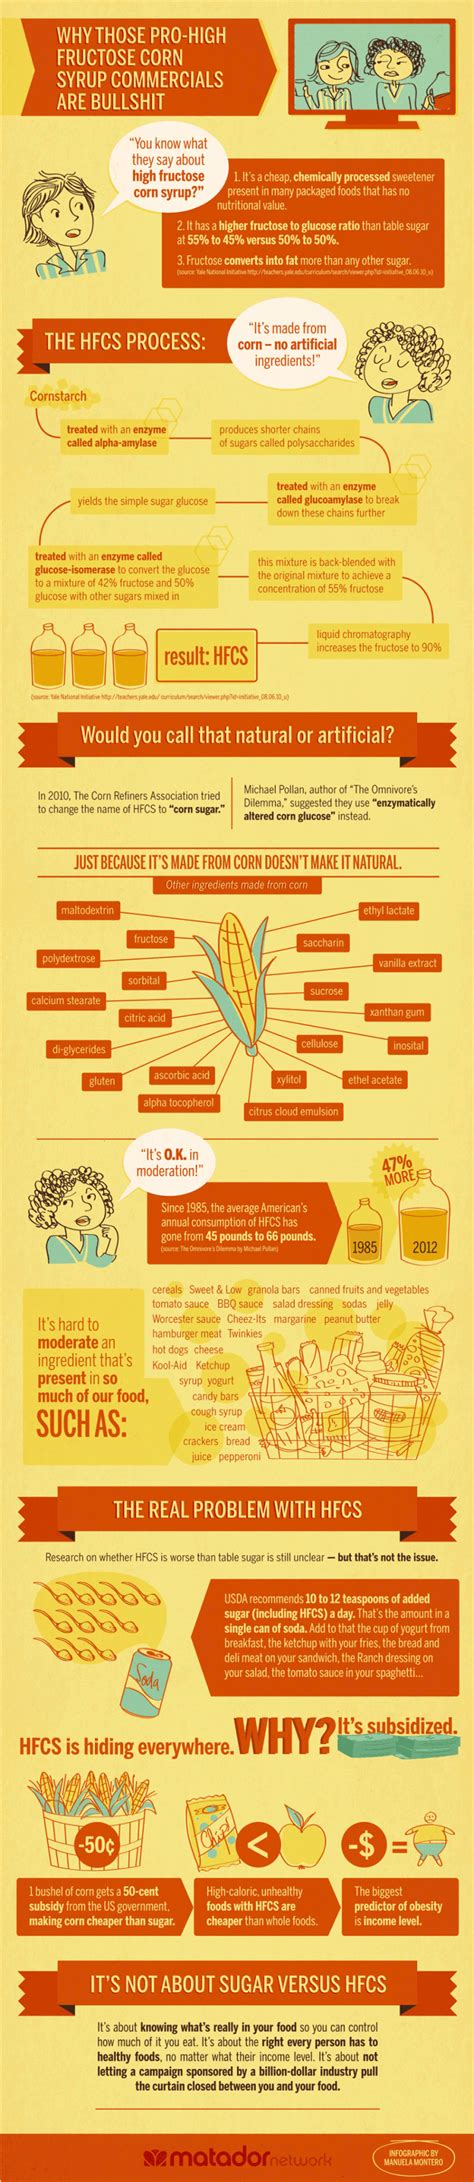 difference between high fructose corn syrup and corn syrup